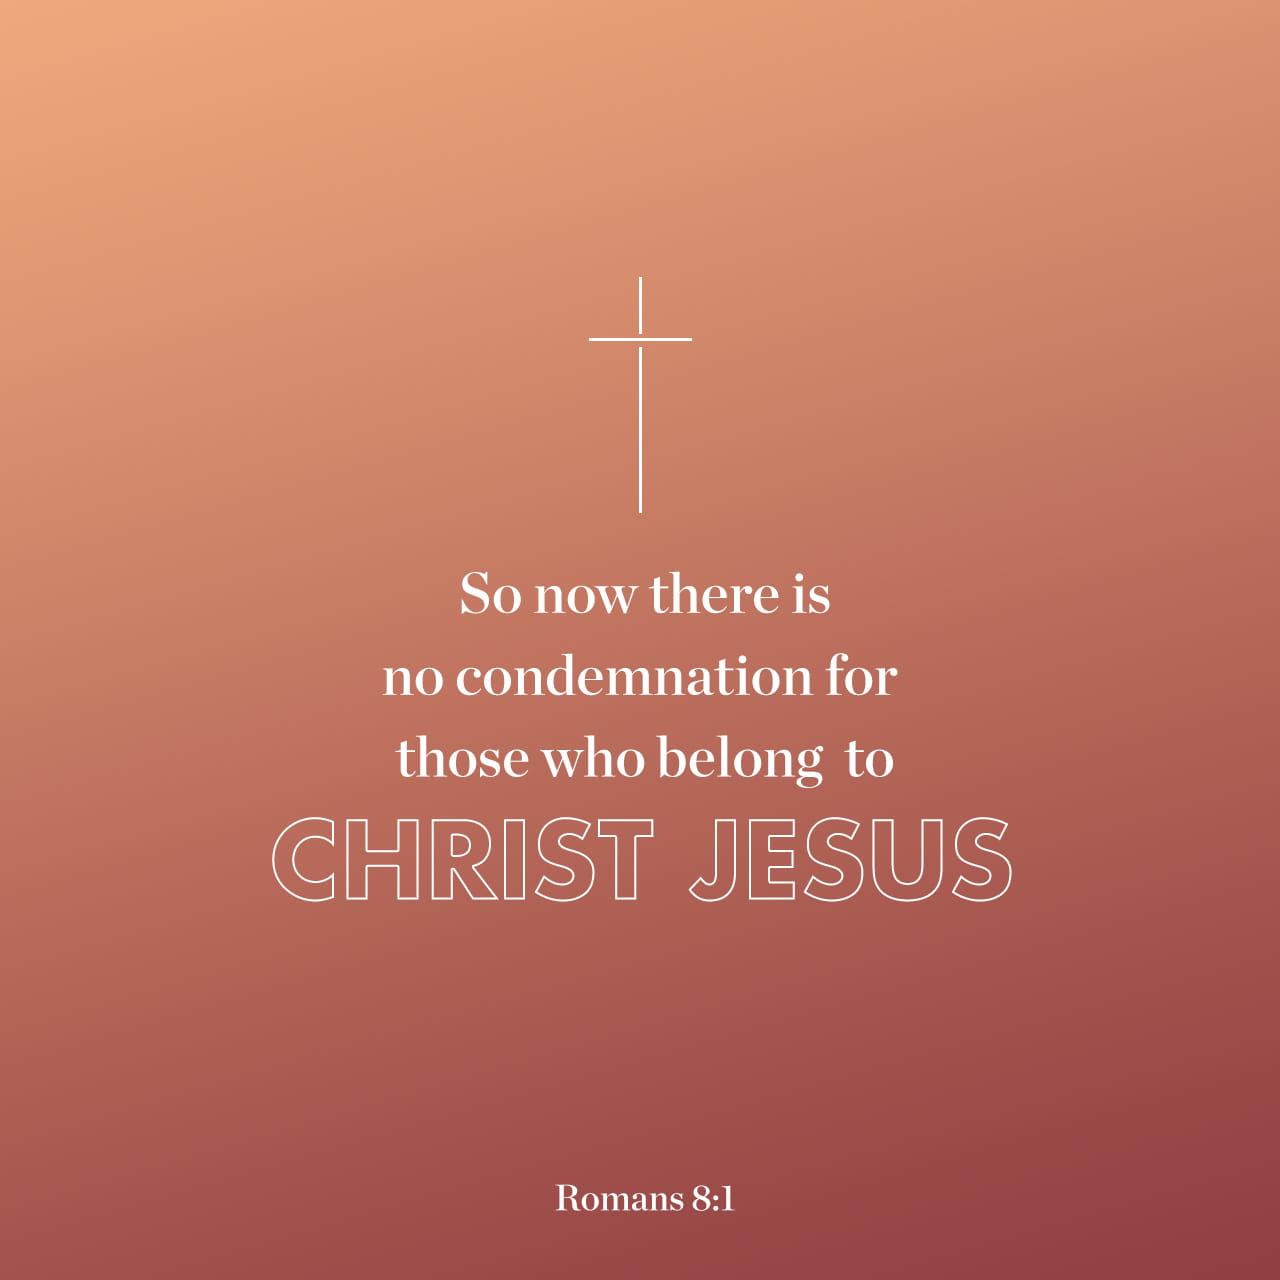 Bible Verse of the Day - day 156 - image 2601 (Romans 8:1)